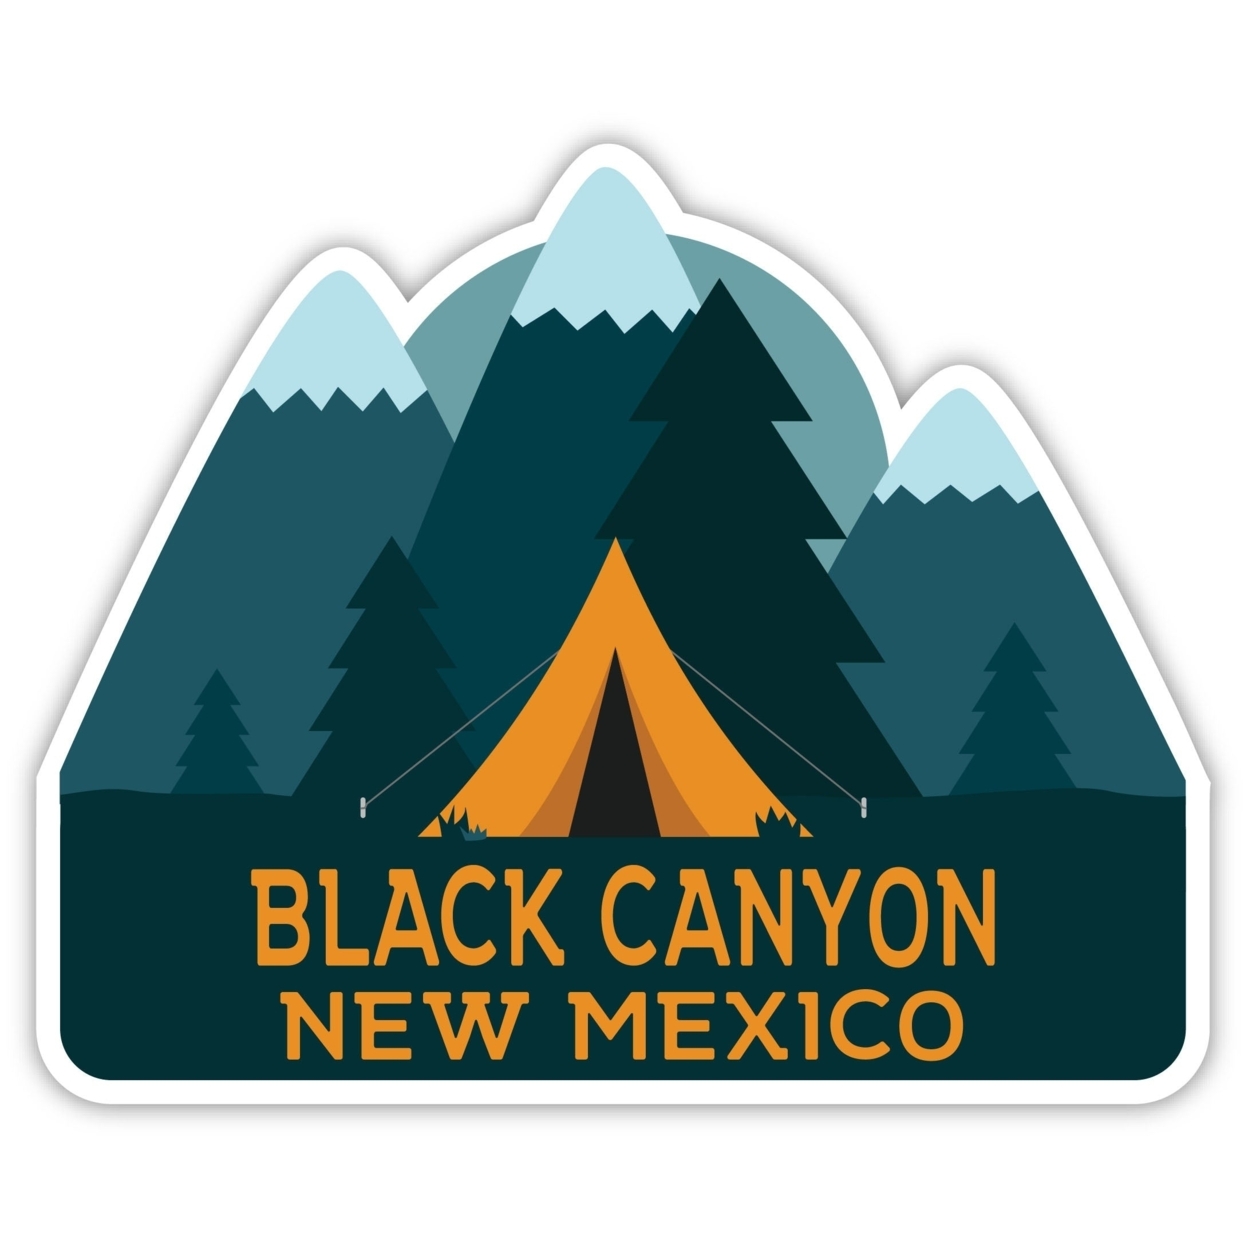 Black Canyon New Mexico Souvenir Decorative Stickers (Choose Theme And Size) - 4-Pack, 10-Inch, Tent